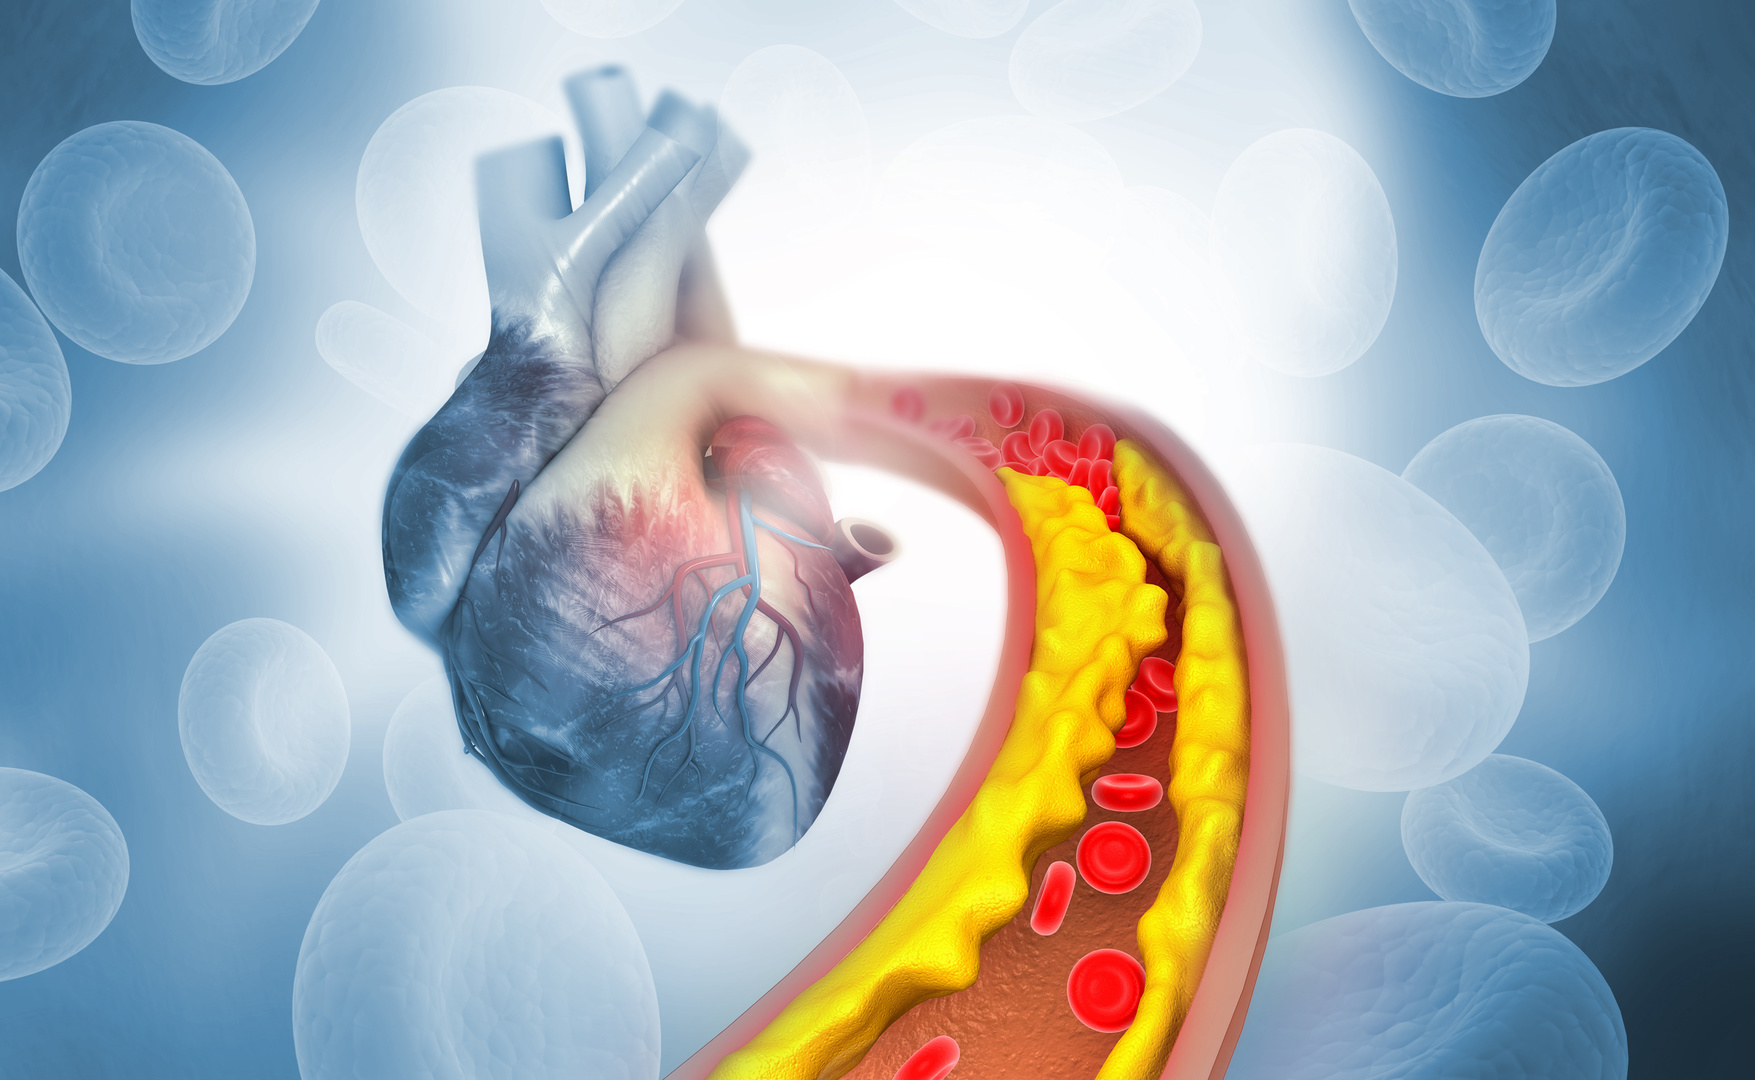 Cardiovascular Atherosclerosis: Prediction, Prevention and Management - Live Streaming CME Event